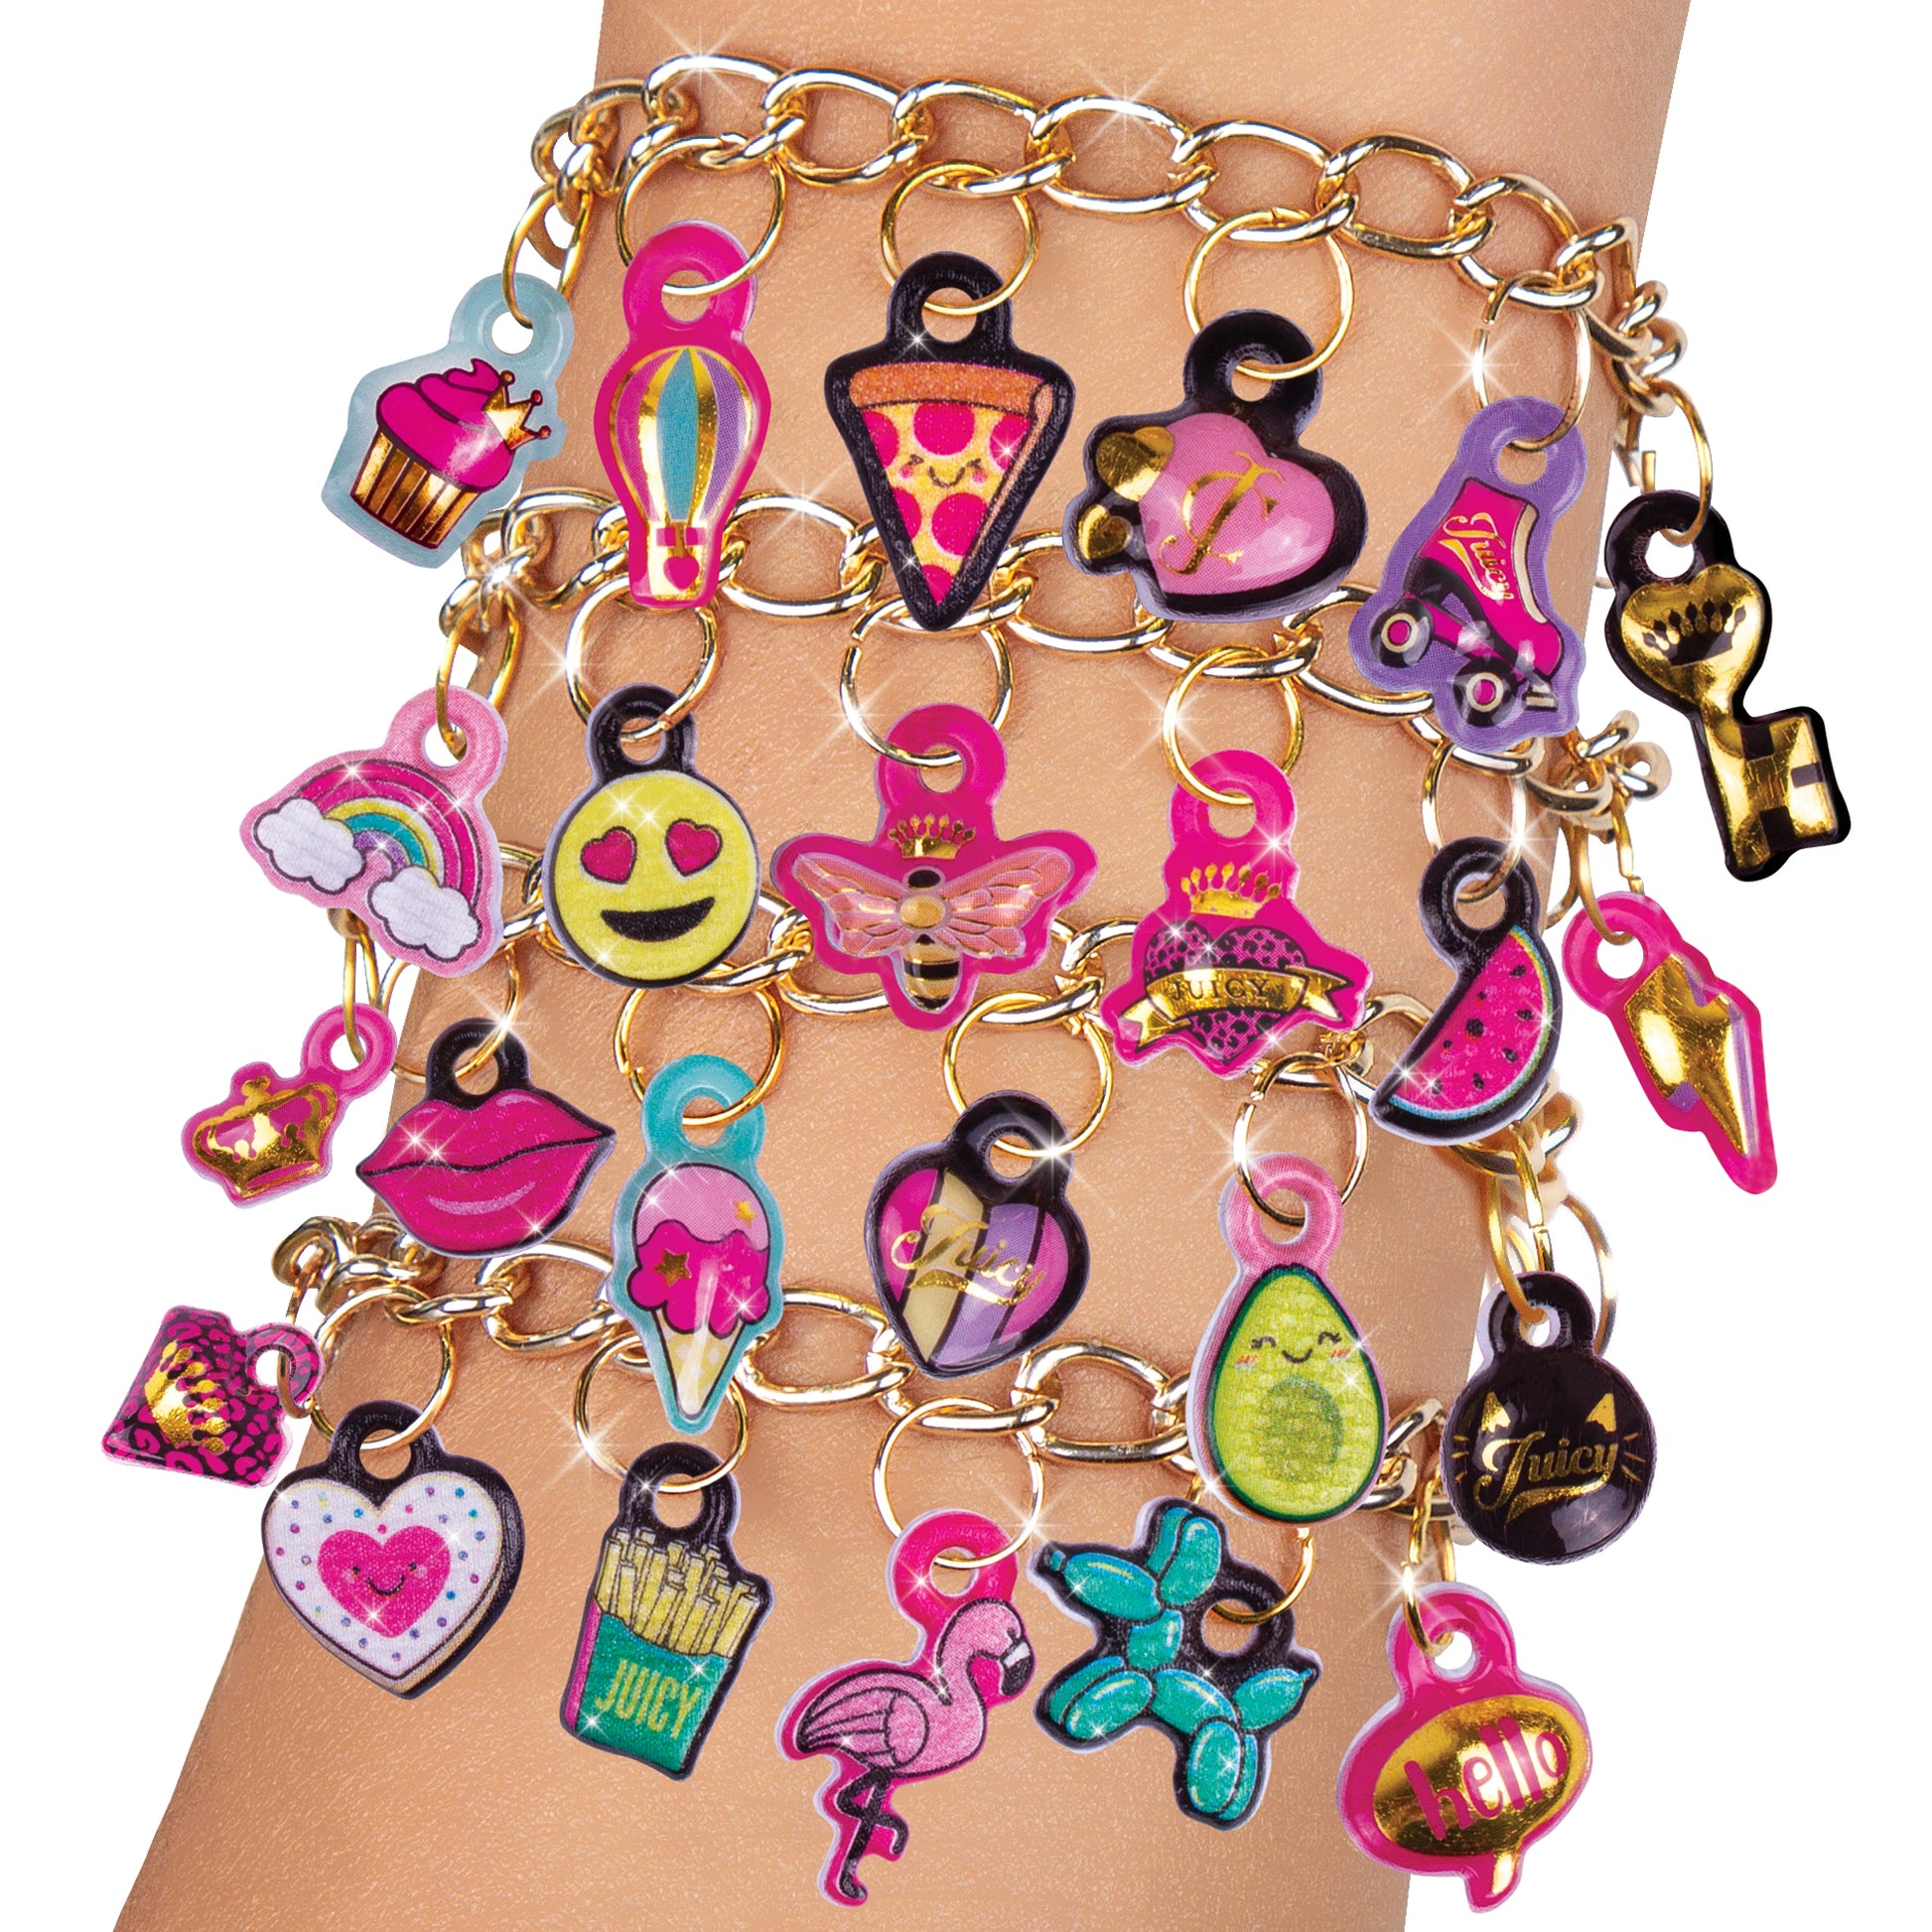 NEW Juicy Couture Perfectly Pink 8 Bracelet Making Kit Gold Charms 185 Pcs  CUTE